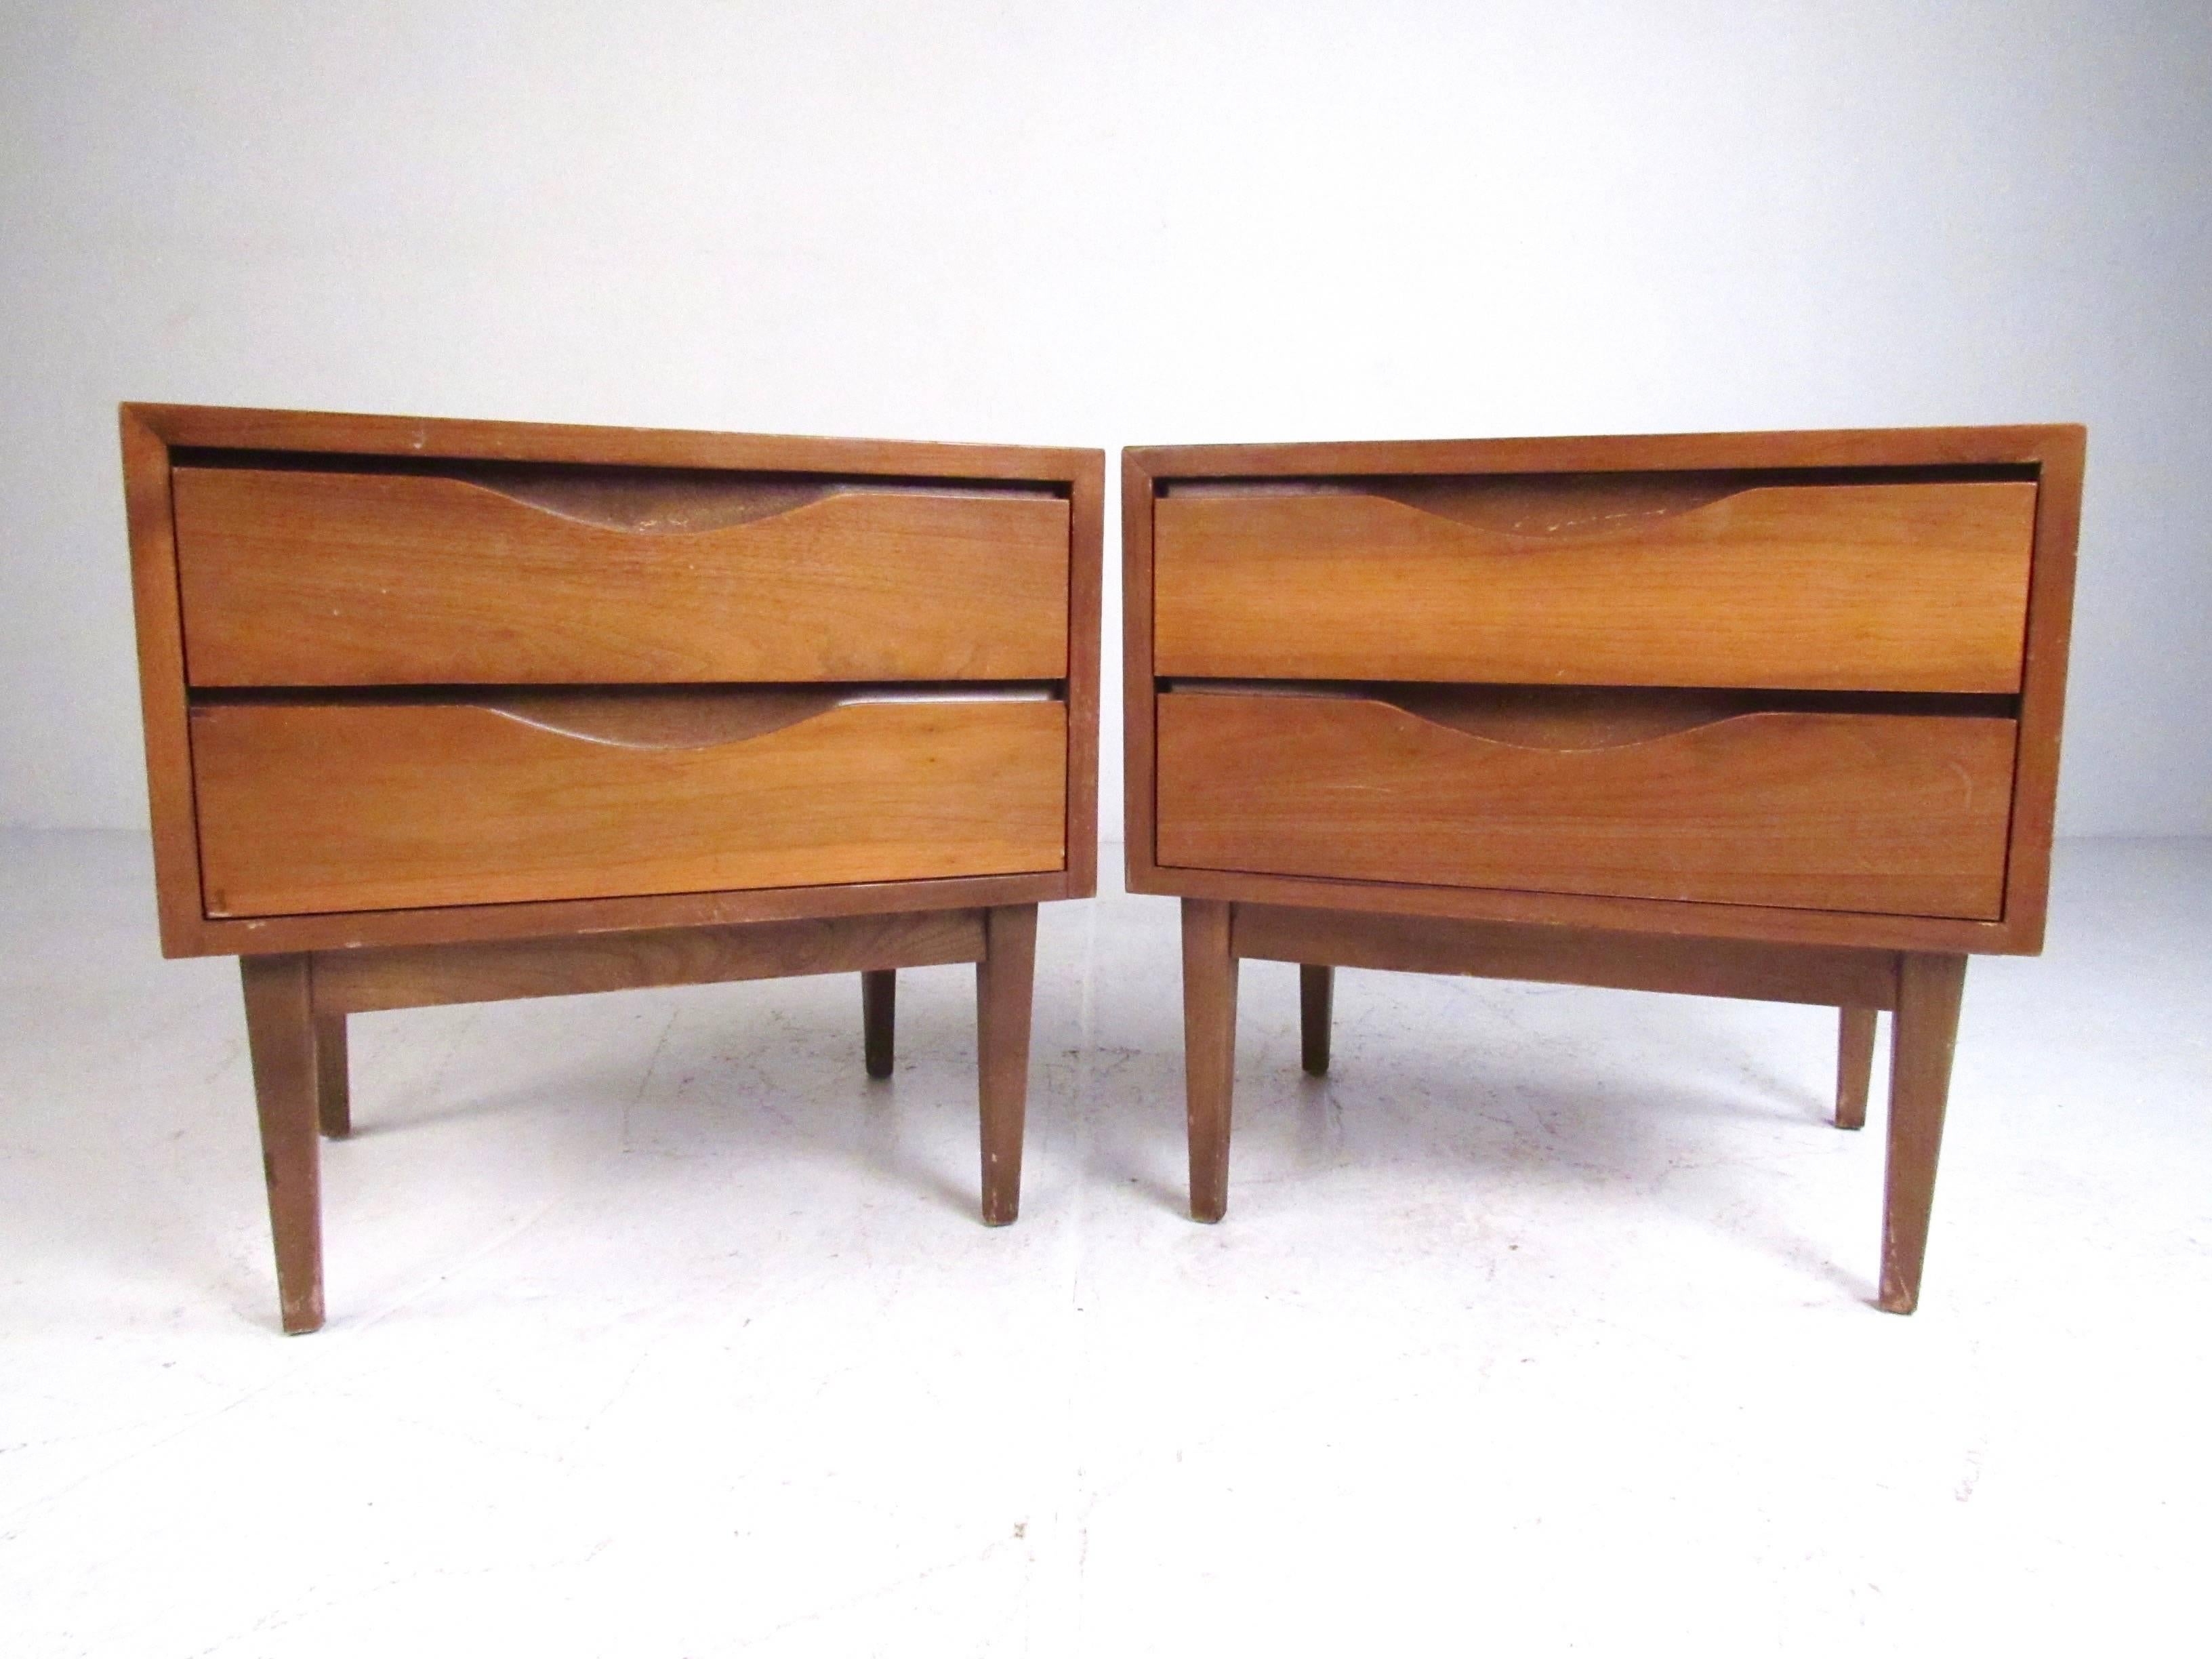 This vintage modern pair of walnut nightstands make a stylish retro addition to any bedroom. Perfect height for bedside storage, but two spacious drawers offer plenty of space for any interior setting. Please confirm item location (NY or NJ).
   